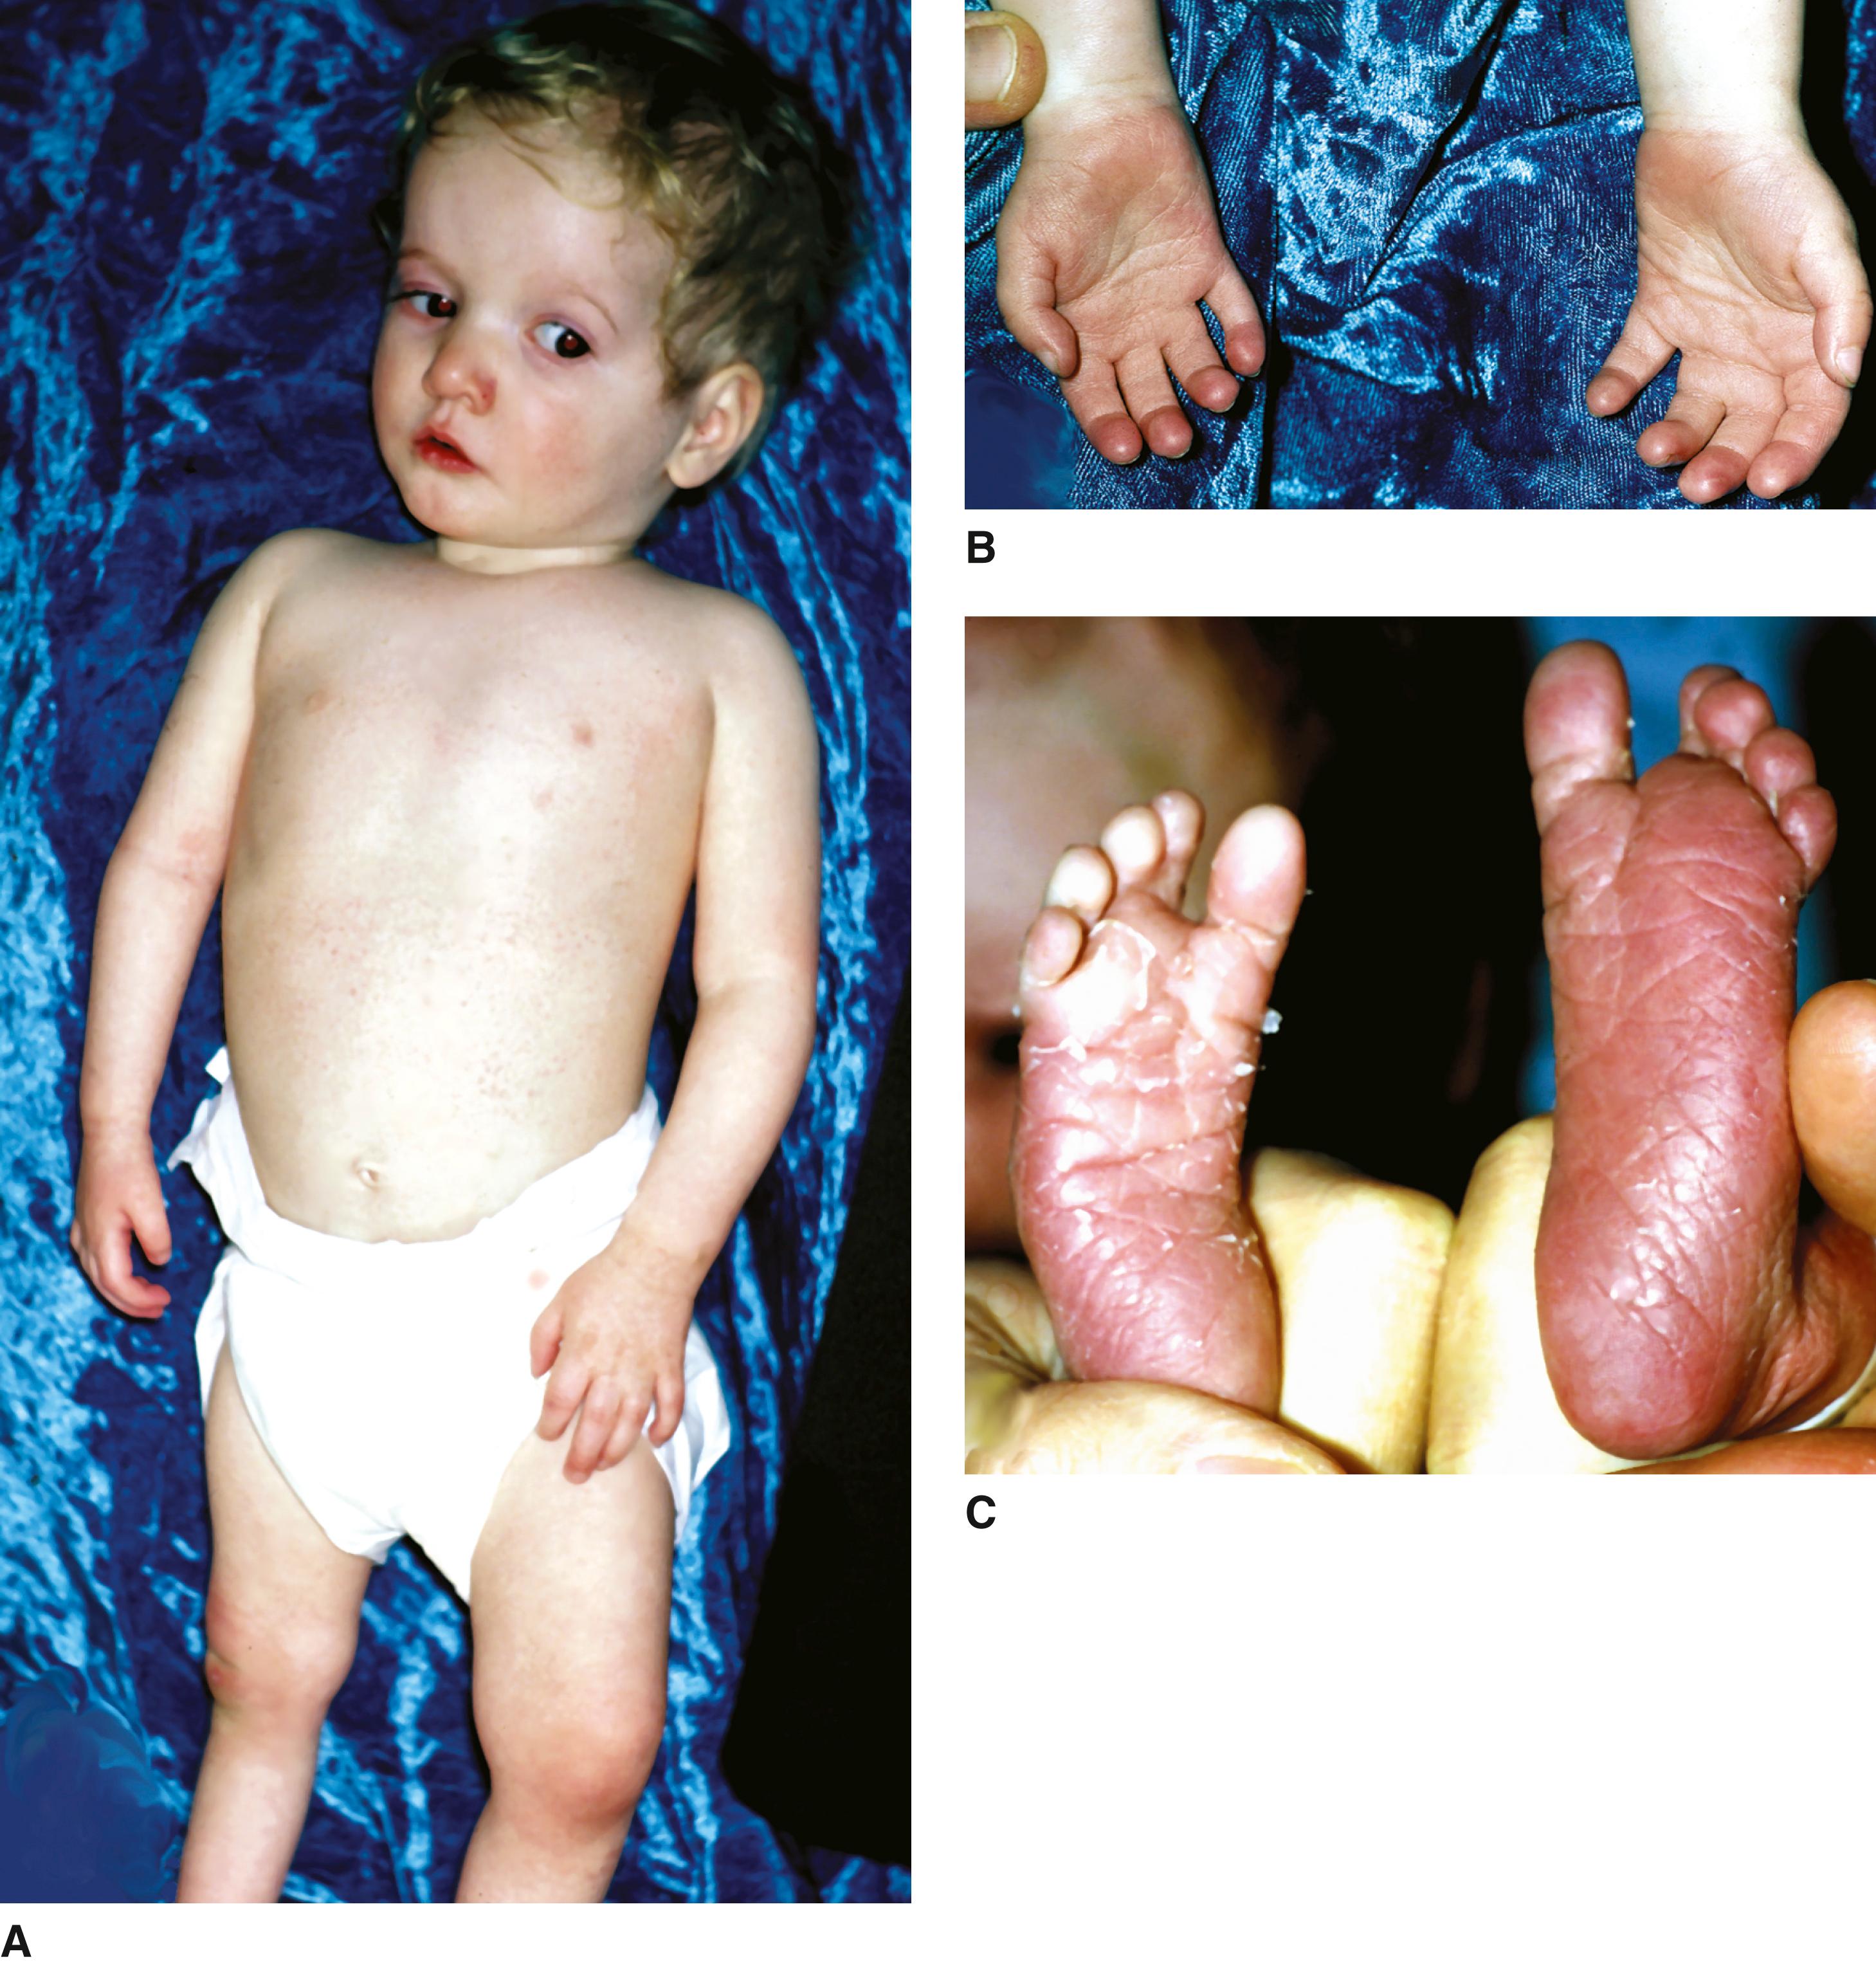 FIGURE 3, A–C, Infant with asymmetric growth deficiency (right side smaller), syndactyly of third and fourth fingers, and mild developmental delay who has triploid/diploid mixoploidy syndrome that is evident only in cultured fibroblasts.